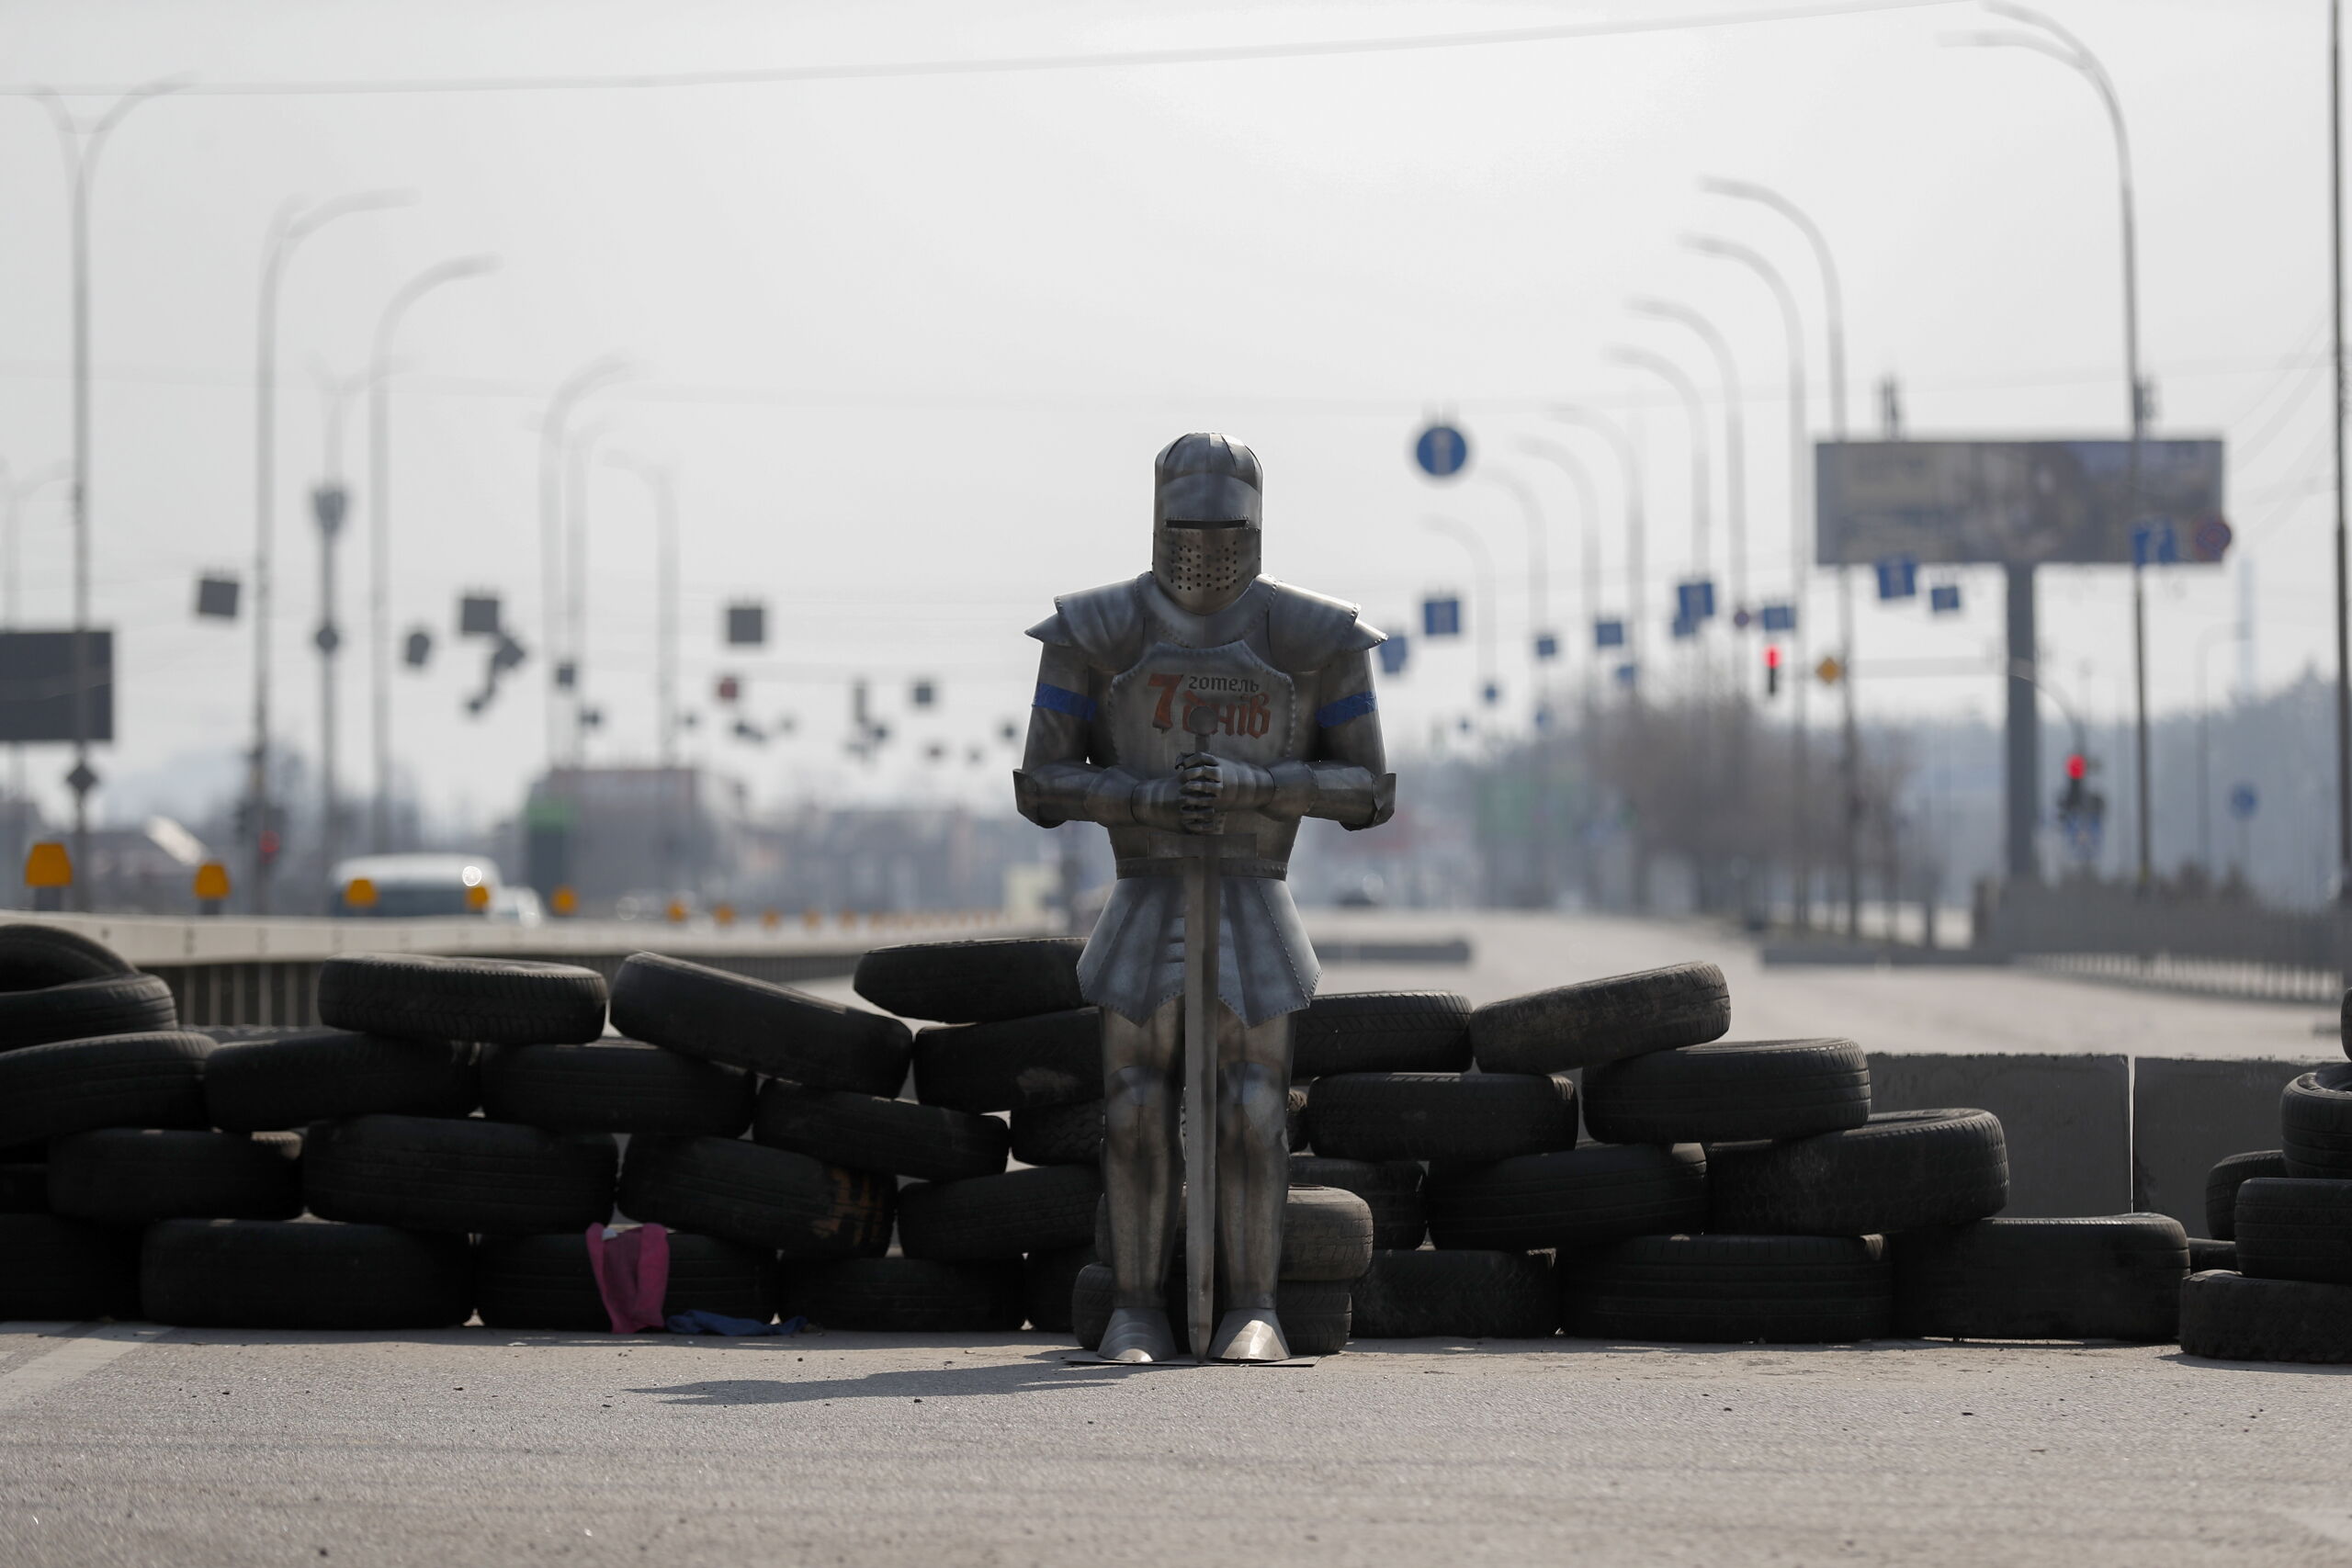 epa09844615 A statue of a warrior with a sword is seen at a checkpoint on the outskirt of Kiev (Kyiv), Ukraine, 23 March 2022. Russian troops entered Ukraine on 24 February prompting the country's president to declare martial law and triggering a series of announcements by Western countries to impose severe economic sanctions on Russia.  EPA/ATEF SAFADI